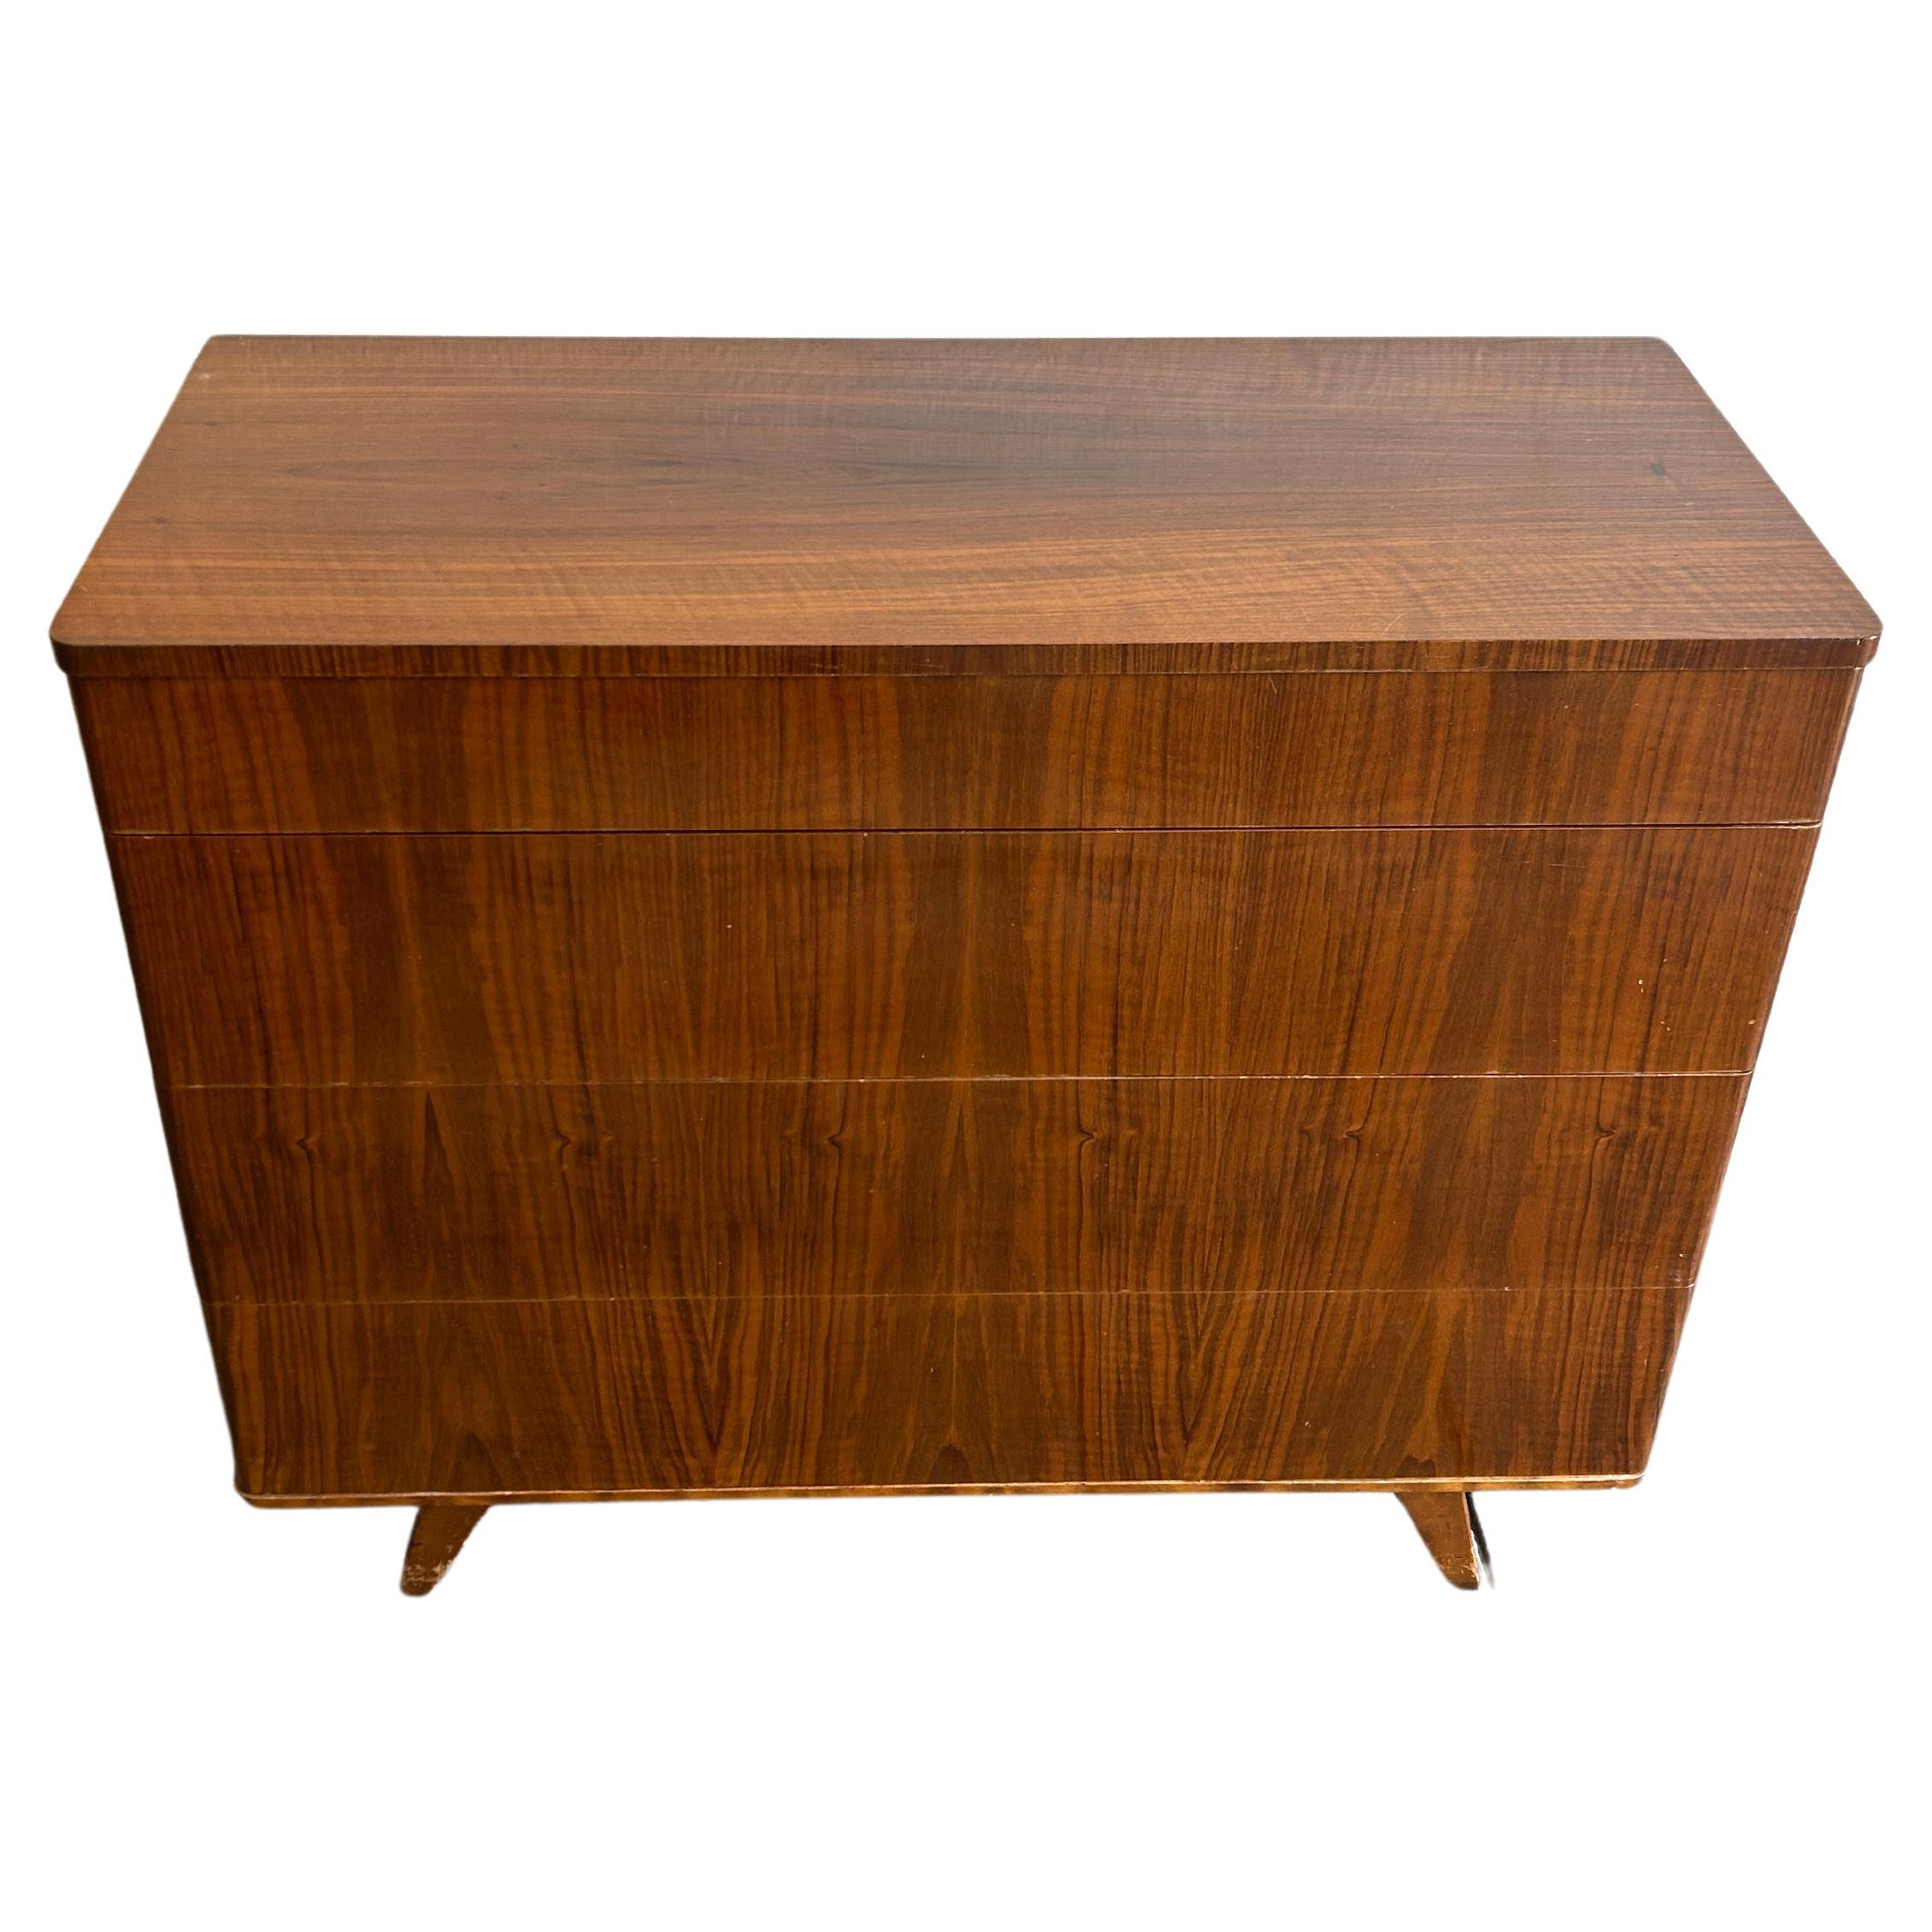 Stunning Midcentury 4 Drawer teak Dresser Made in Sweden In Good Condition For Sale In BROOKLYN, NY